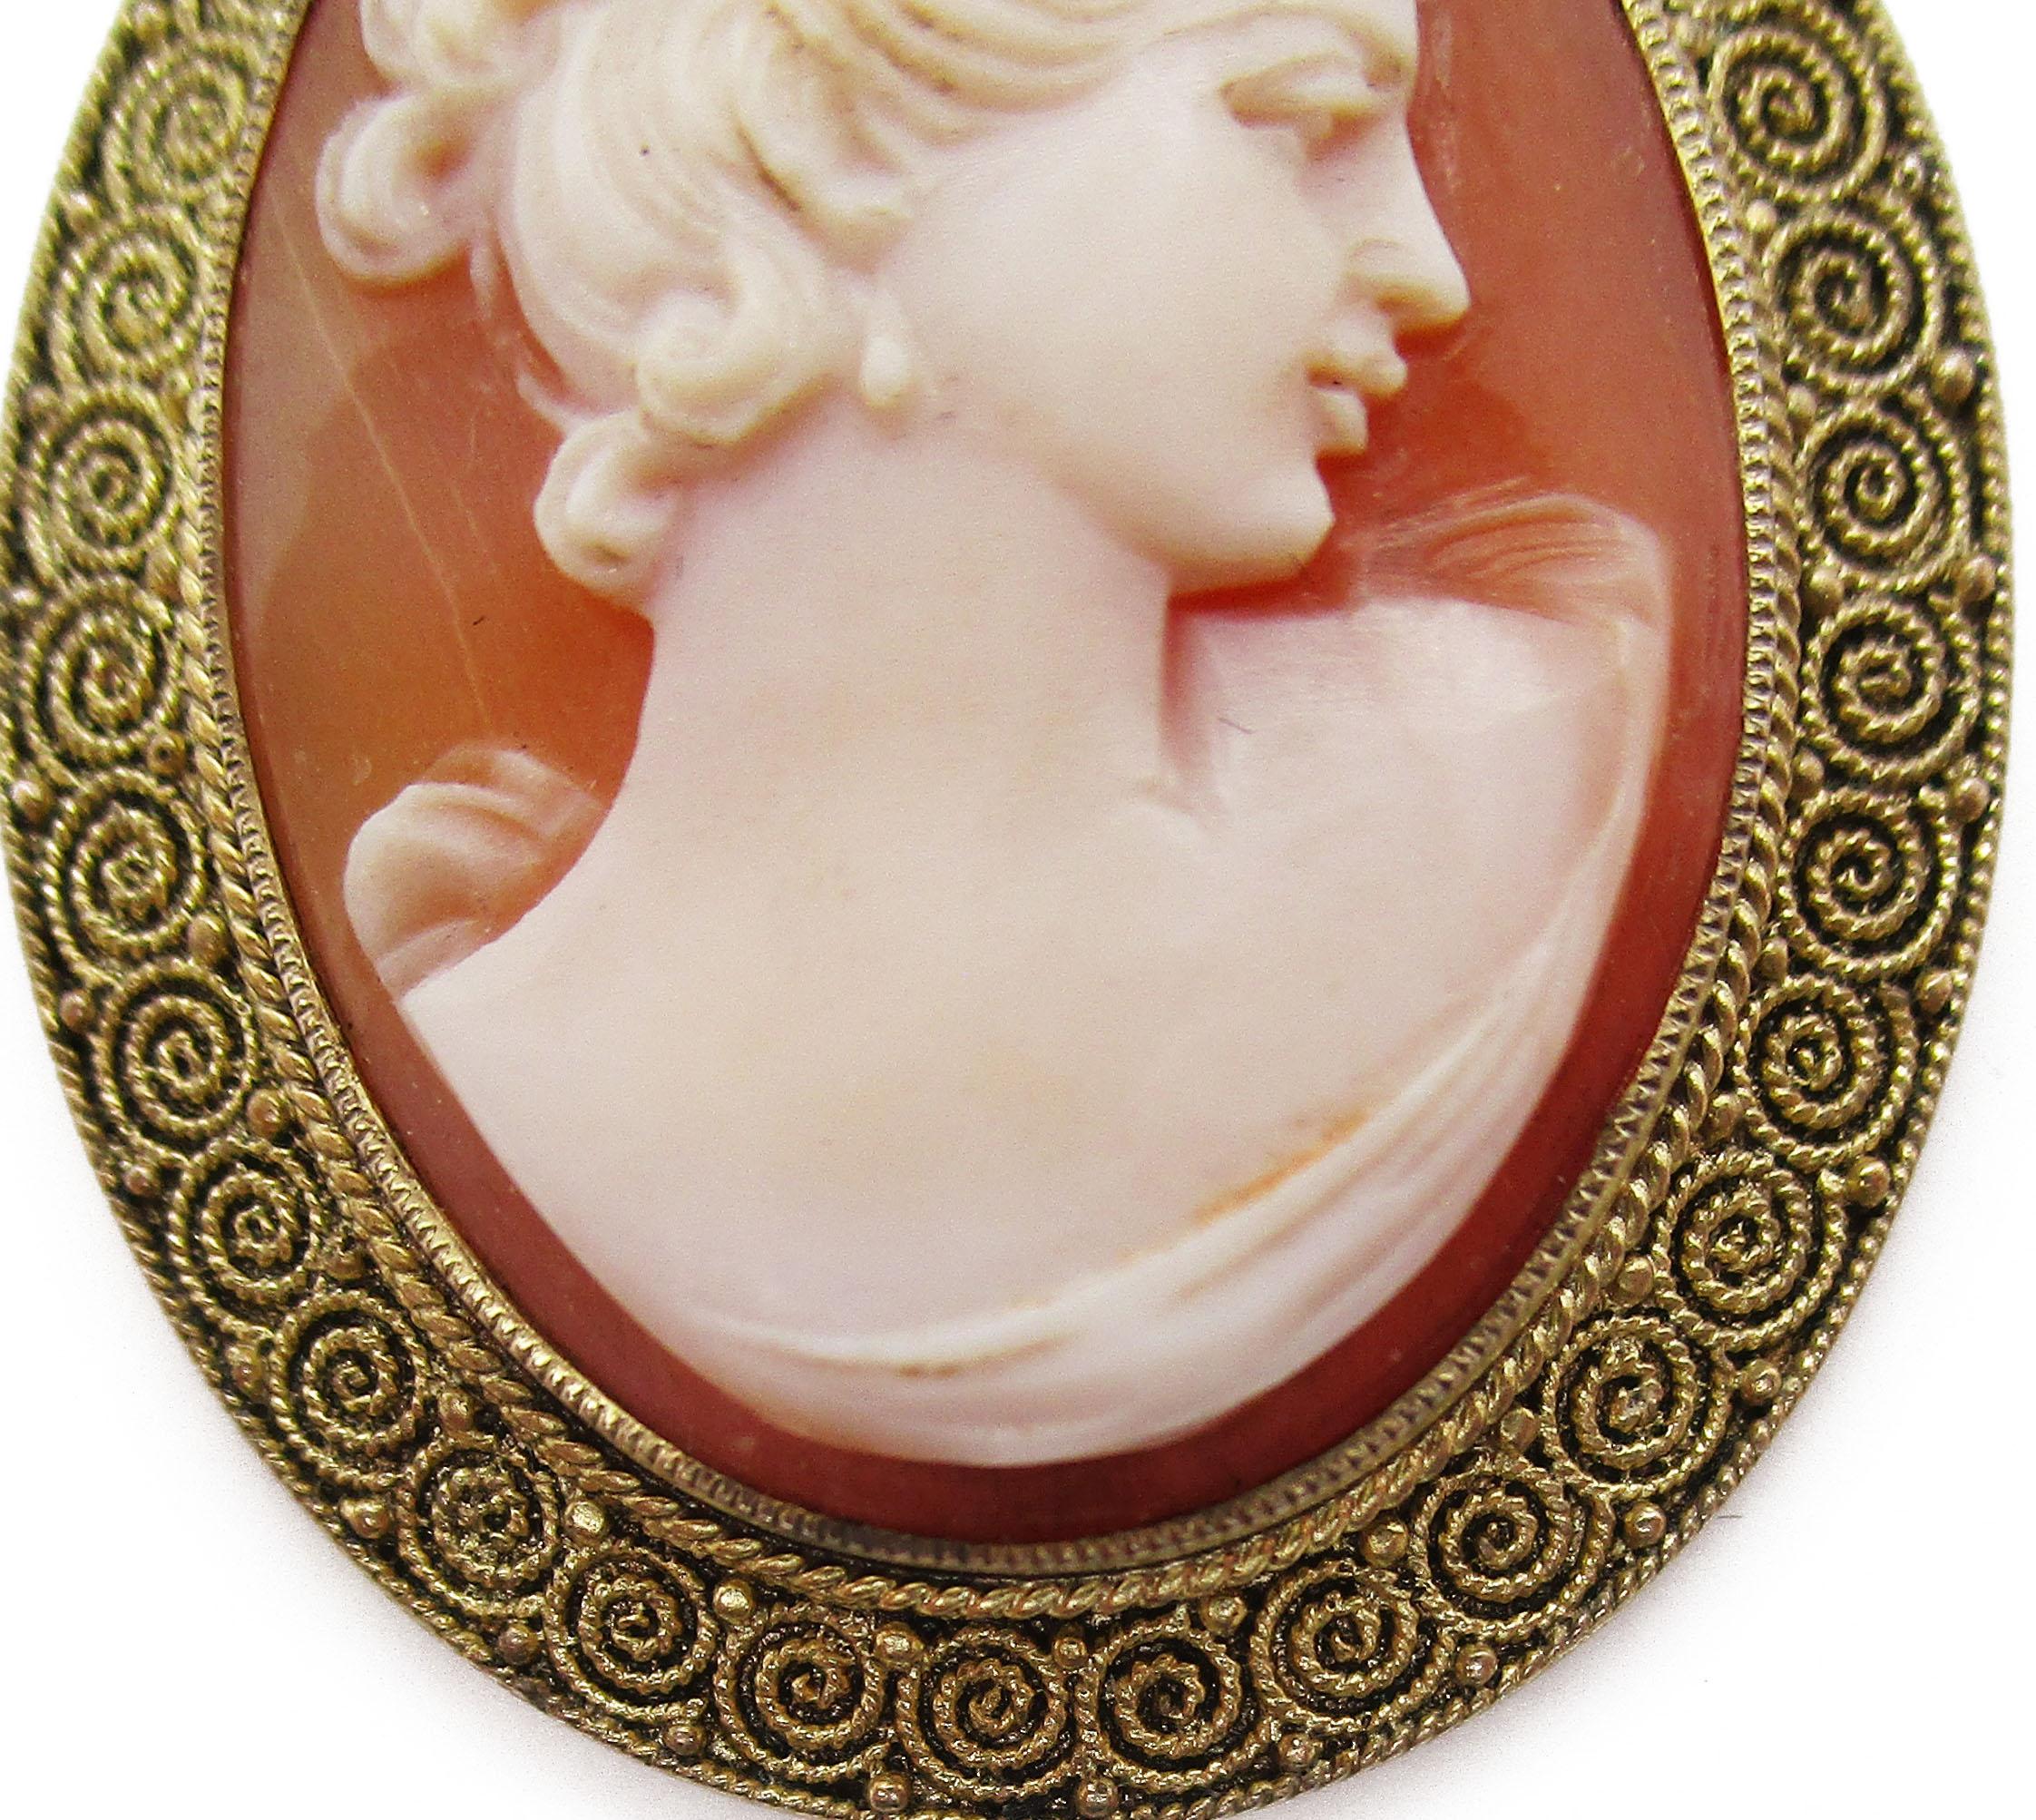 1880 Etruscan Vermeil Theodor Fahrner Shell Cameo Necklace For Sale 1